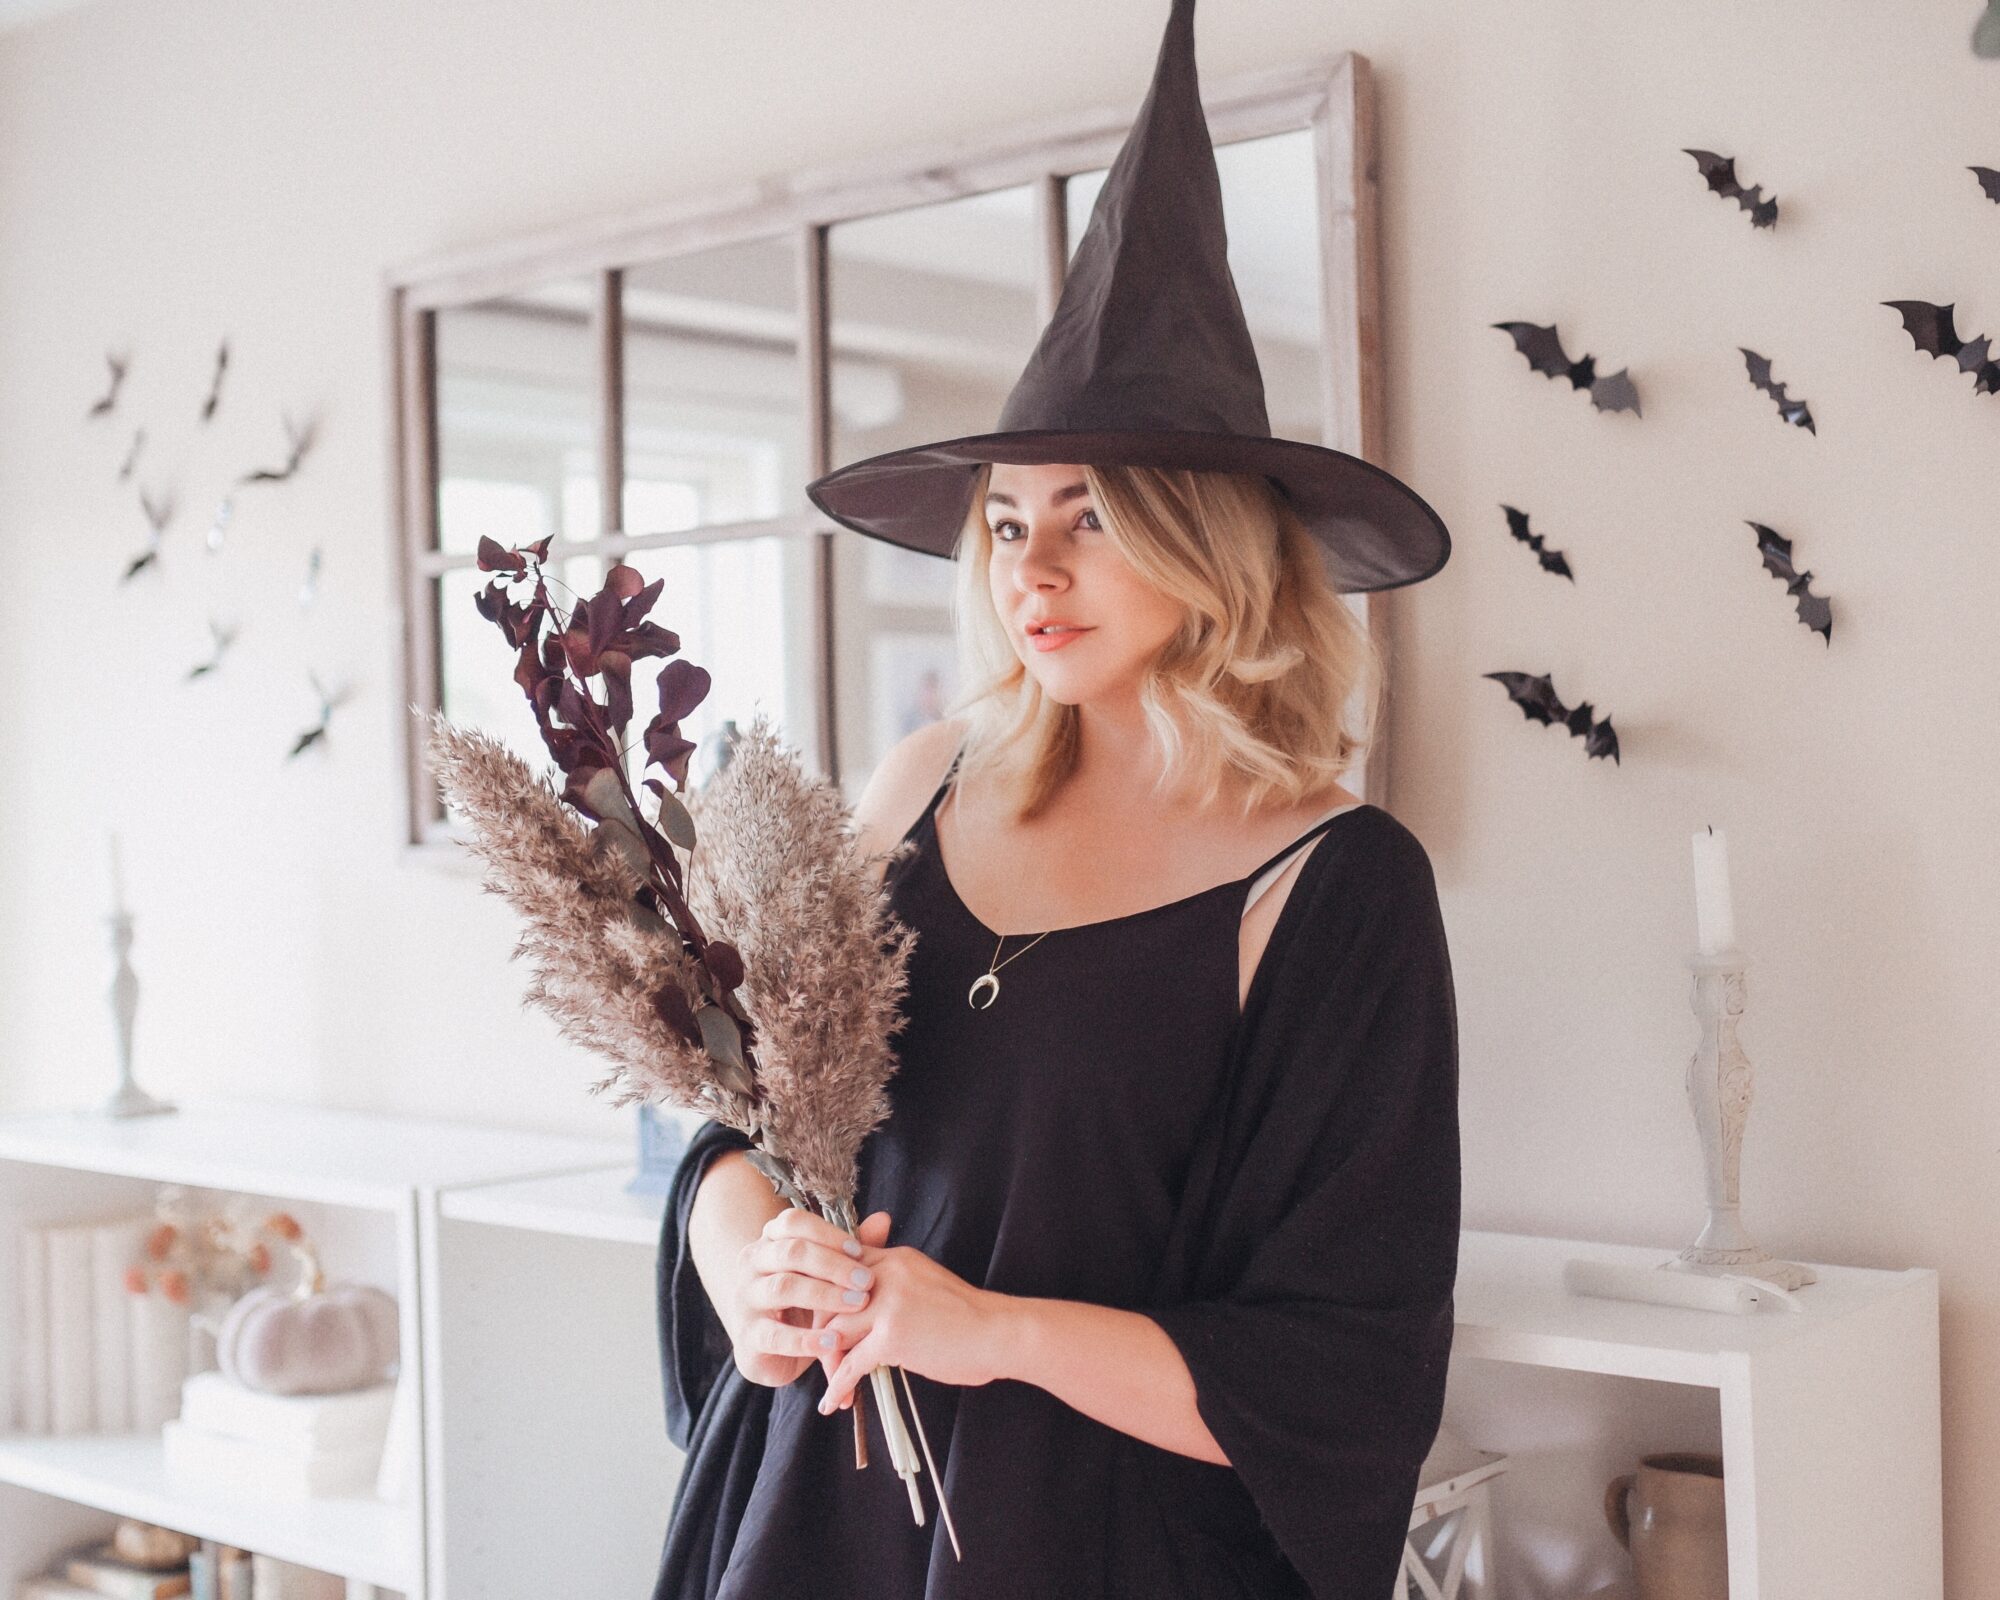 Woman dressed in a witch costume holding dried flowers